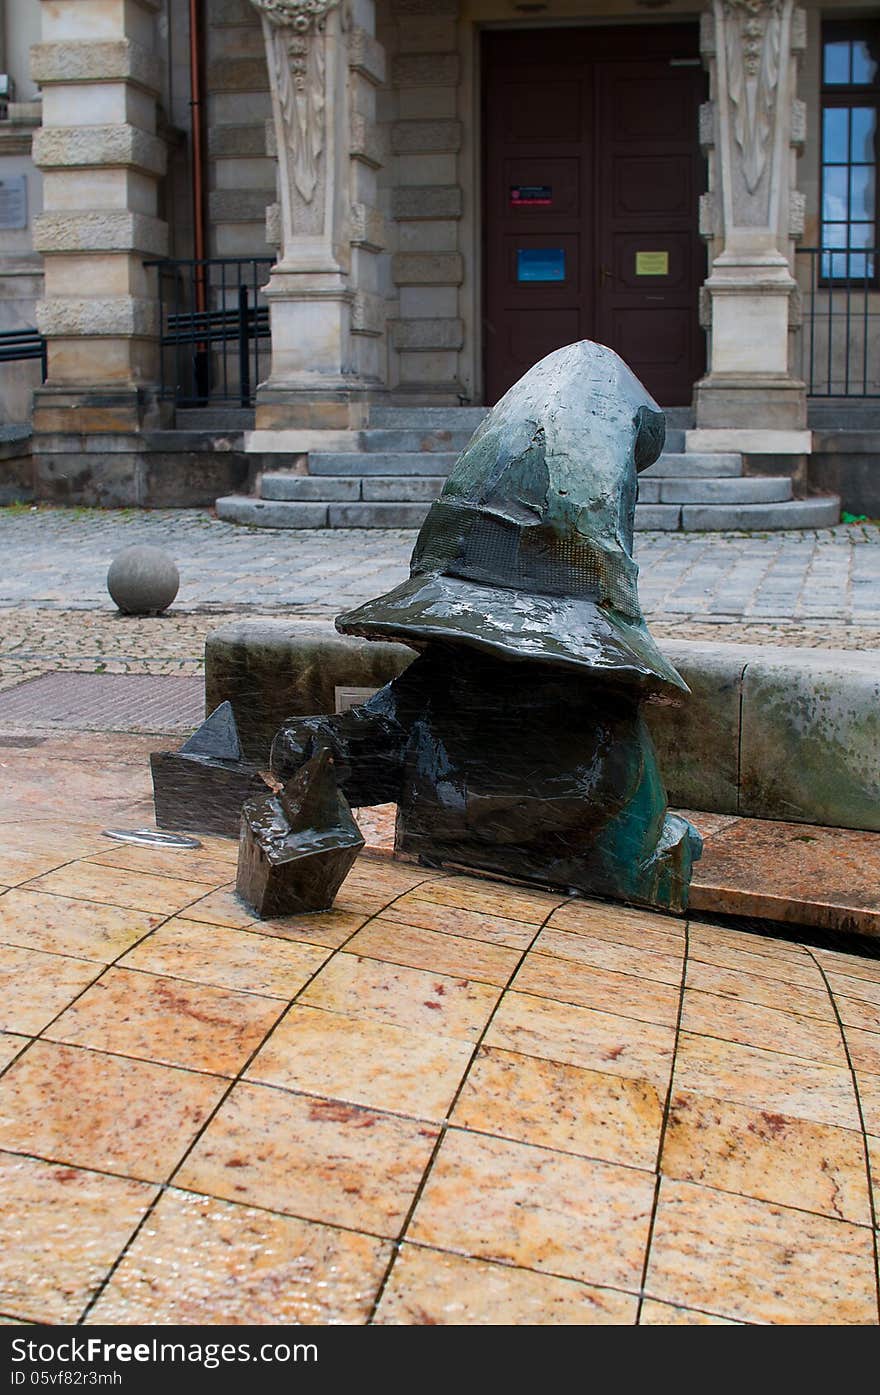 Symbol of Wroclaw, brass dwarf. There are more than 230 in the city and still they come! Water Dwarfs: dropping boats, Feeding Birds, gardener, actor, Parasolnik, Wierzbownik, water collector. Symbol of Wroclaw, brass dwarf. There are more than 230 in the city and still they come! Water Dwarfs: dropping boats, Feeding Birds, gardener, actor, Parasolnik, Wierzbownik, water collector